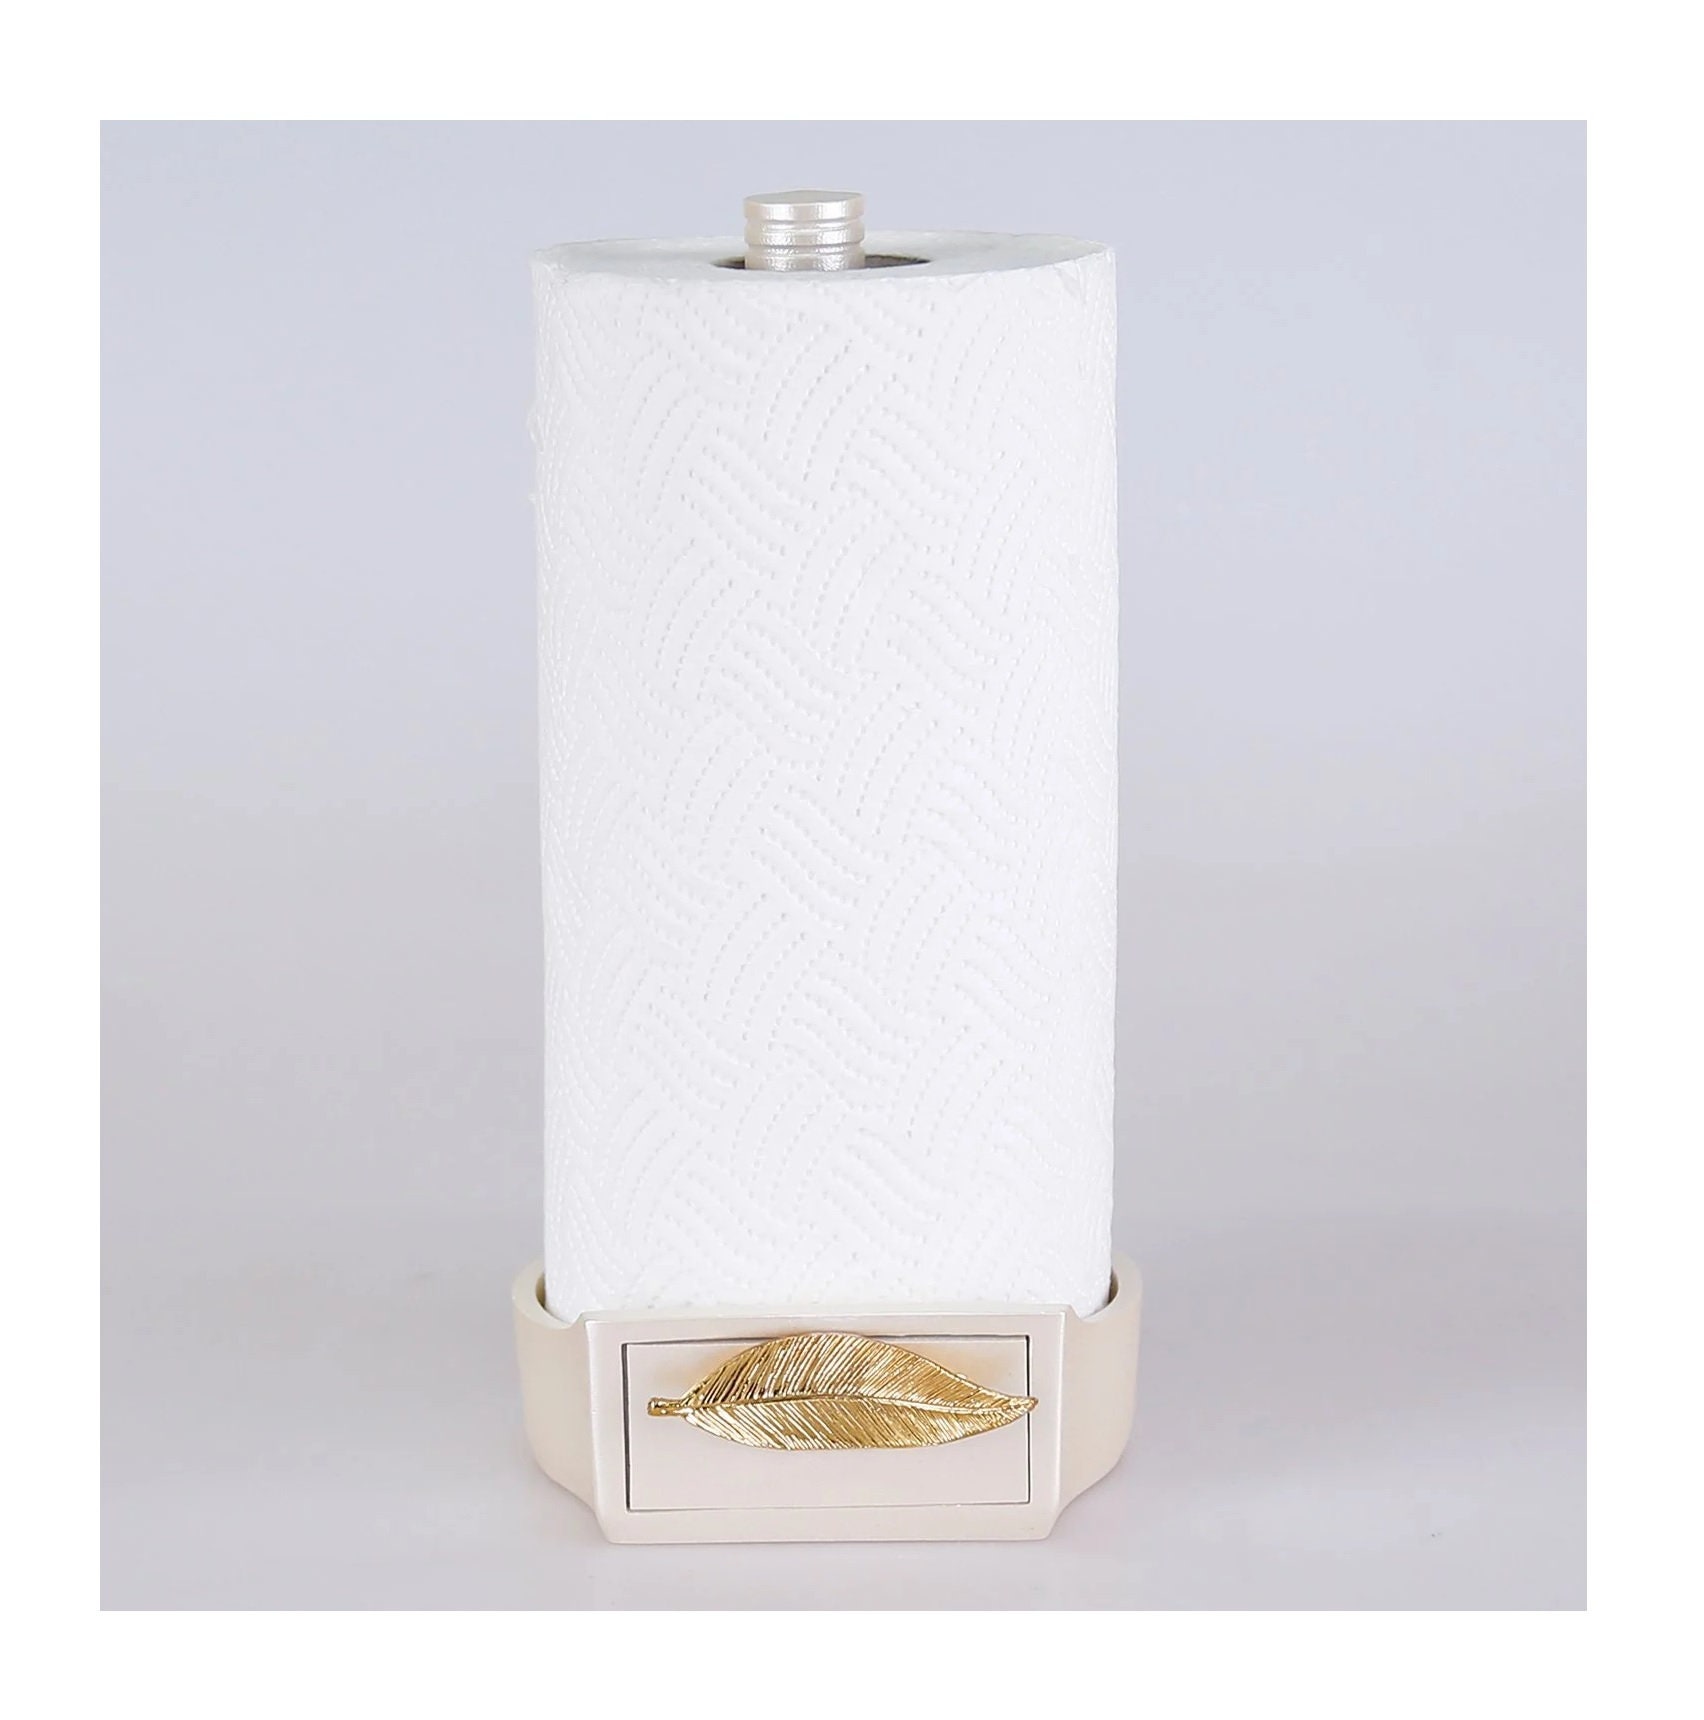 Leaf Paper Towel Holder in Taupe and Gold Colors / Napkin 